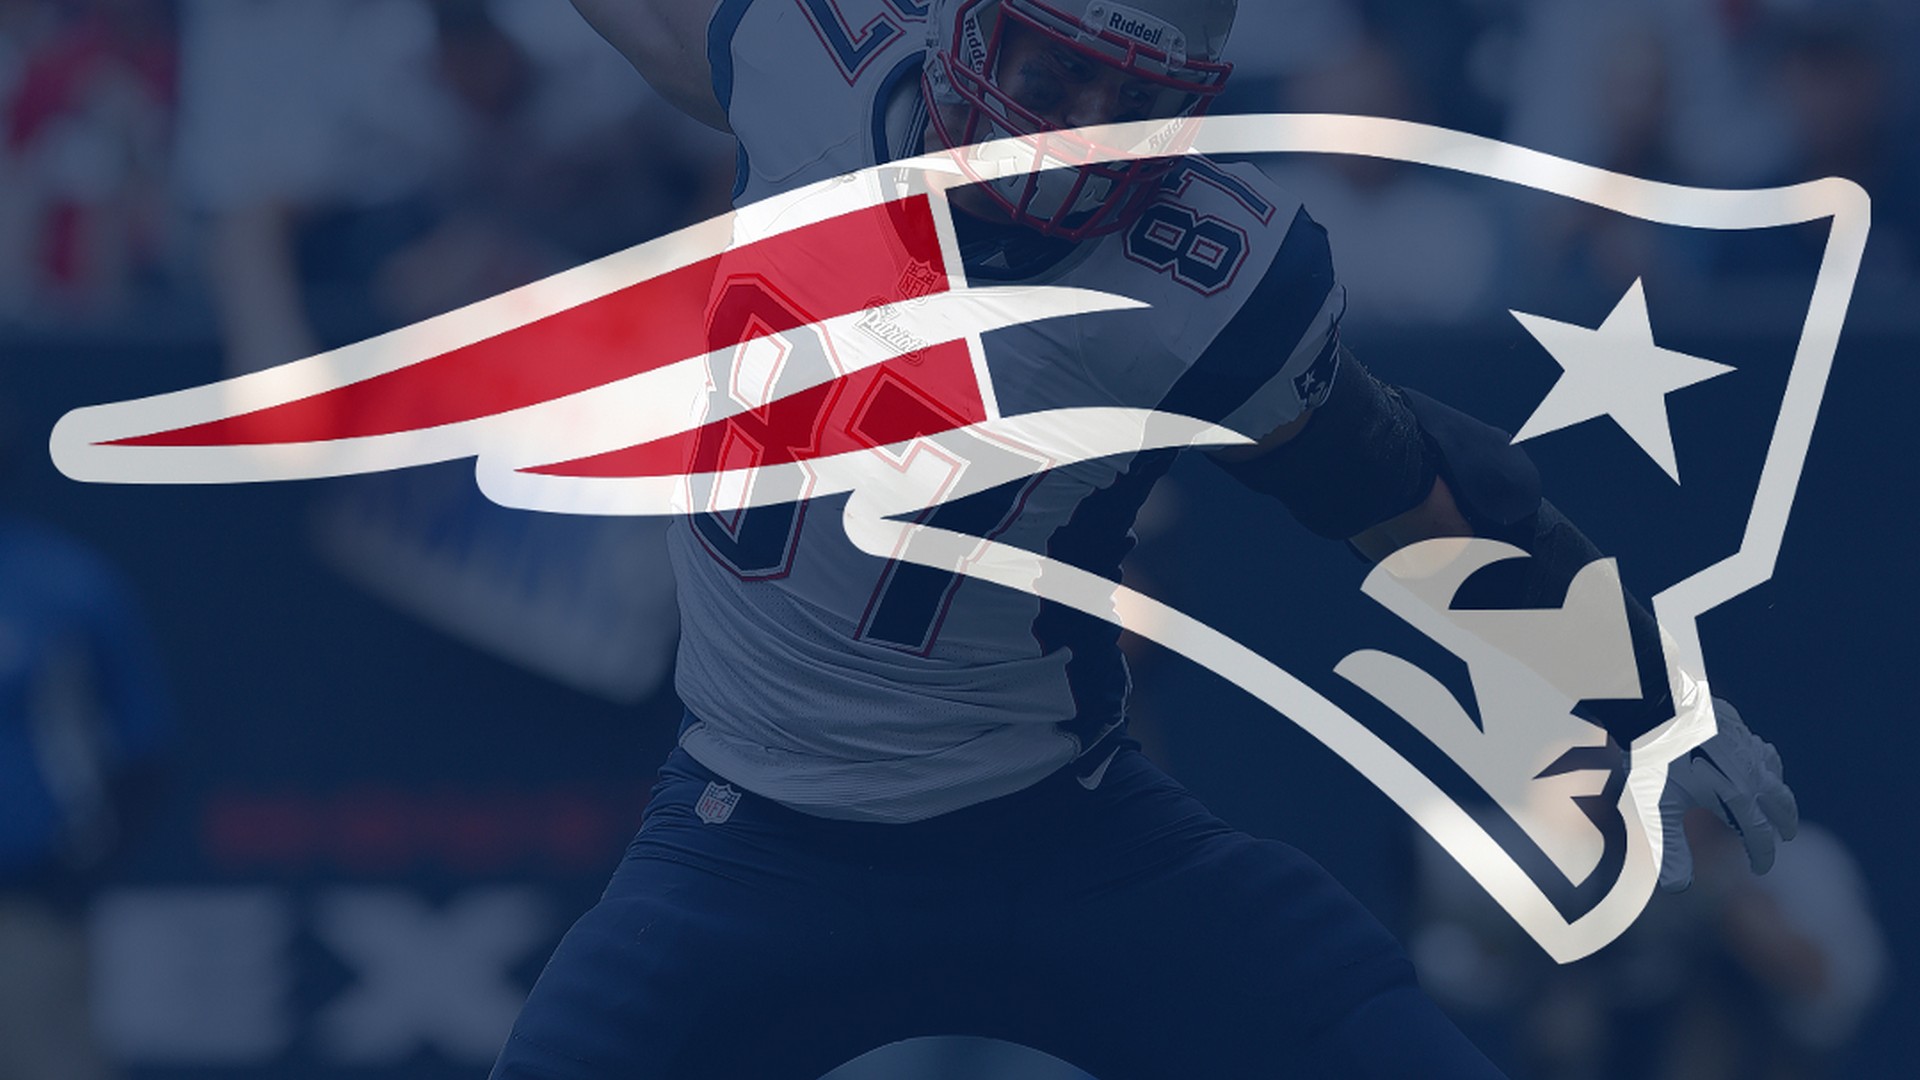 NE Patriots For PC Wallpaper With Resolution 1920X1080 pixel. You can make this wallpaper for your Mac or Windows Desktop Background, iPhone, Android or Tablet and another Smartphone device for free